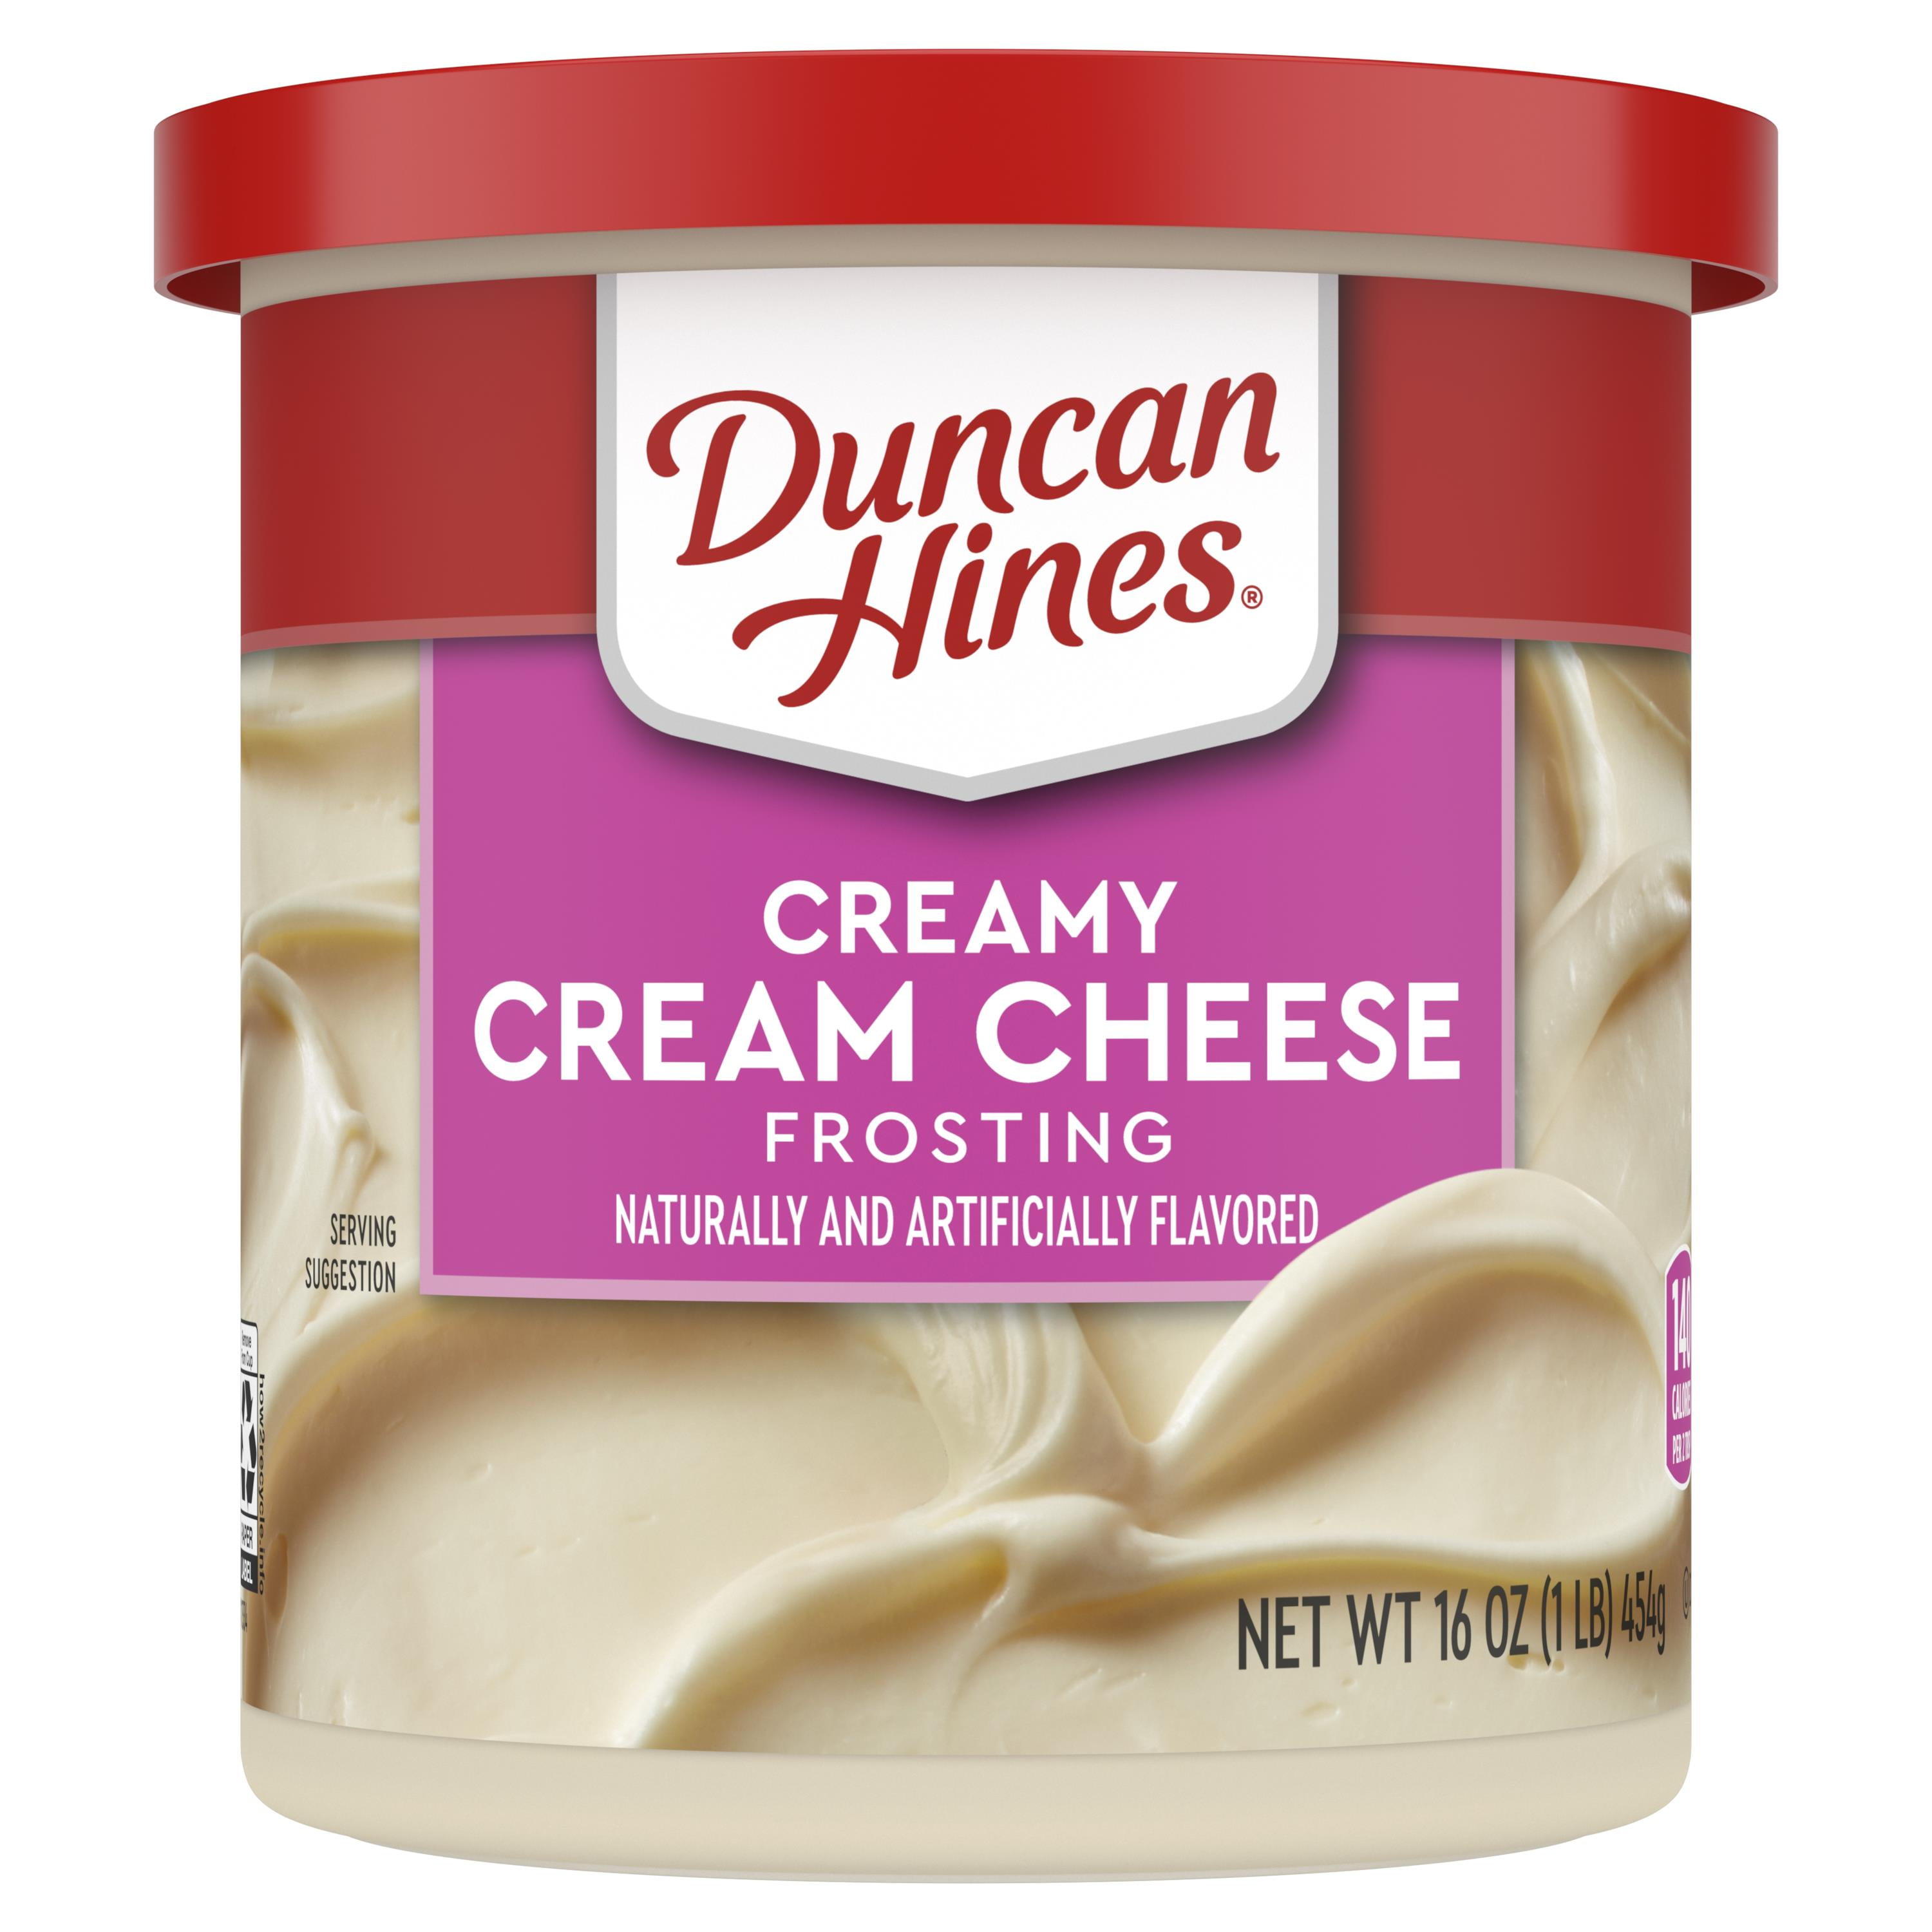 Duncan Hines Classic Cream Cheese Creamy Home-Style Frosting, 16 Oz